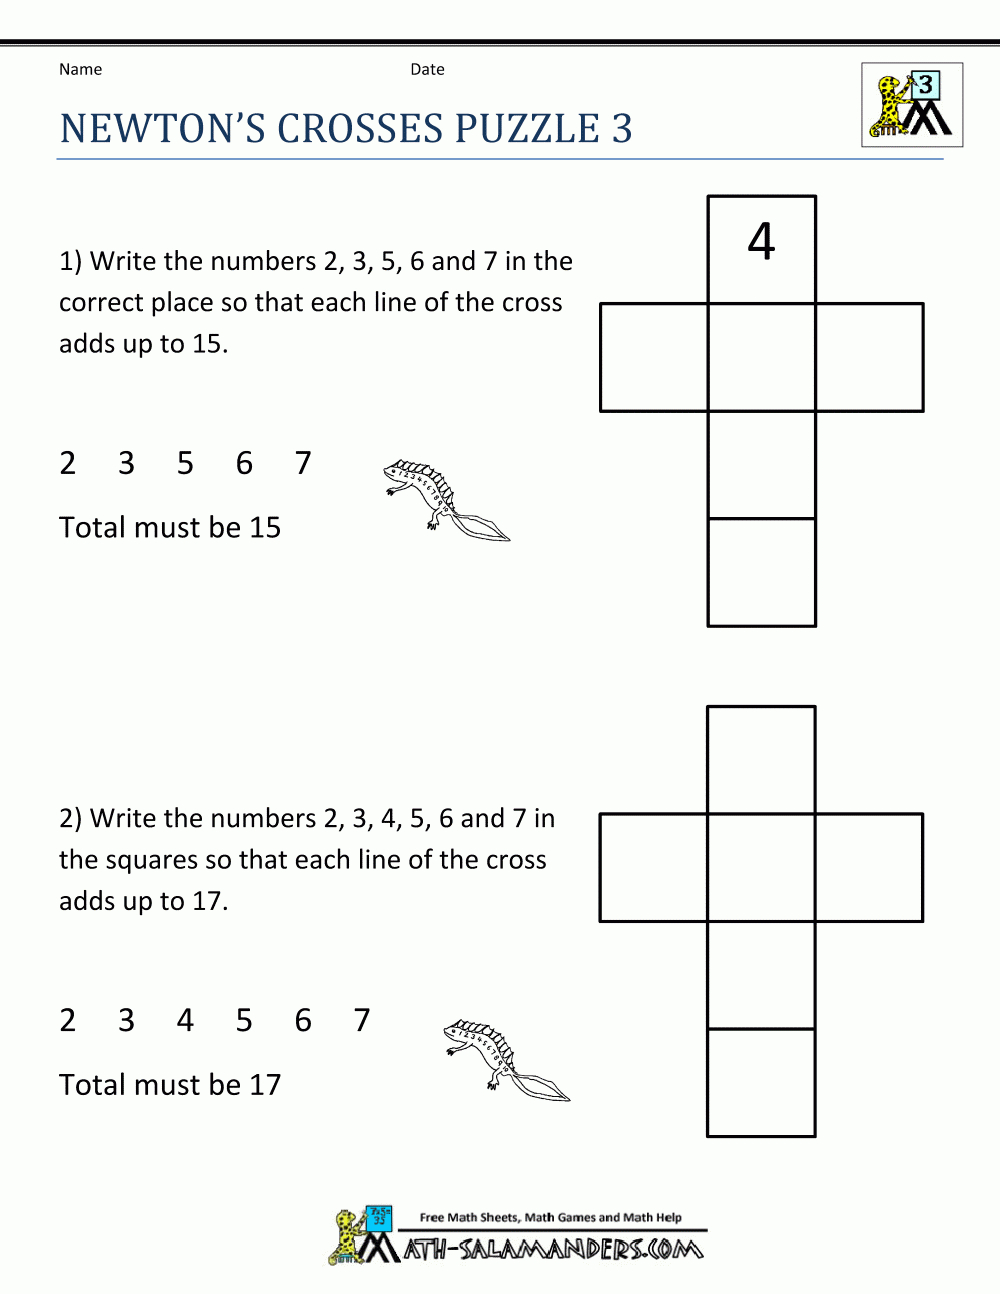 Math Puzzle Worksheets 3Rd Grade - Crossword Puzzle Printable 3Rd Grade